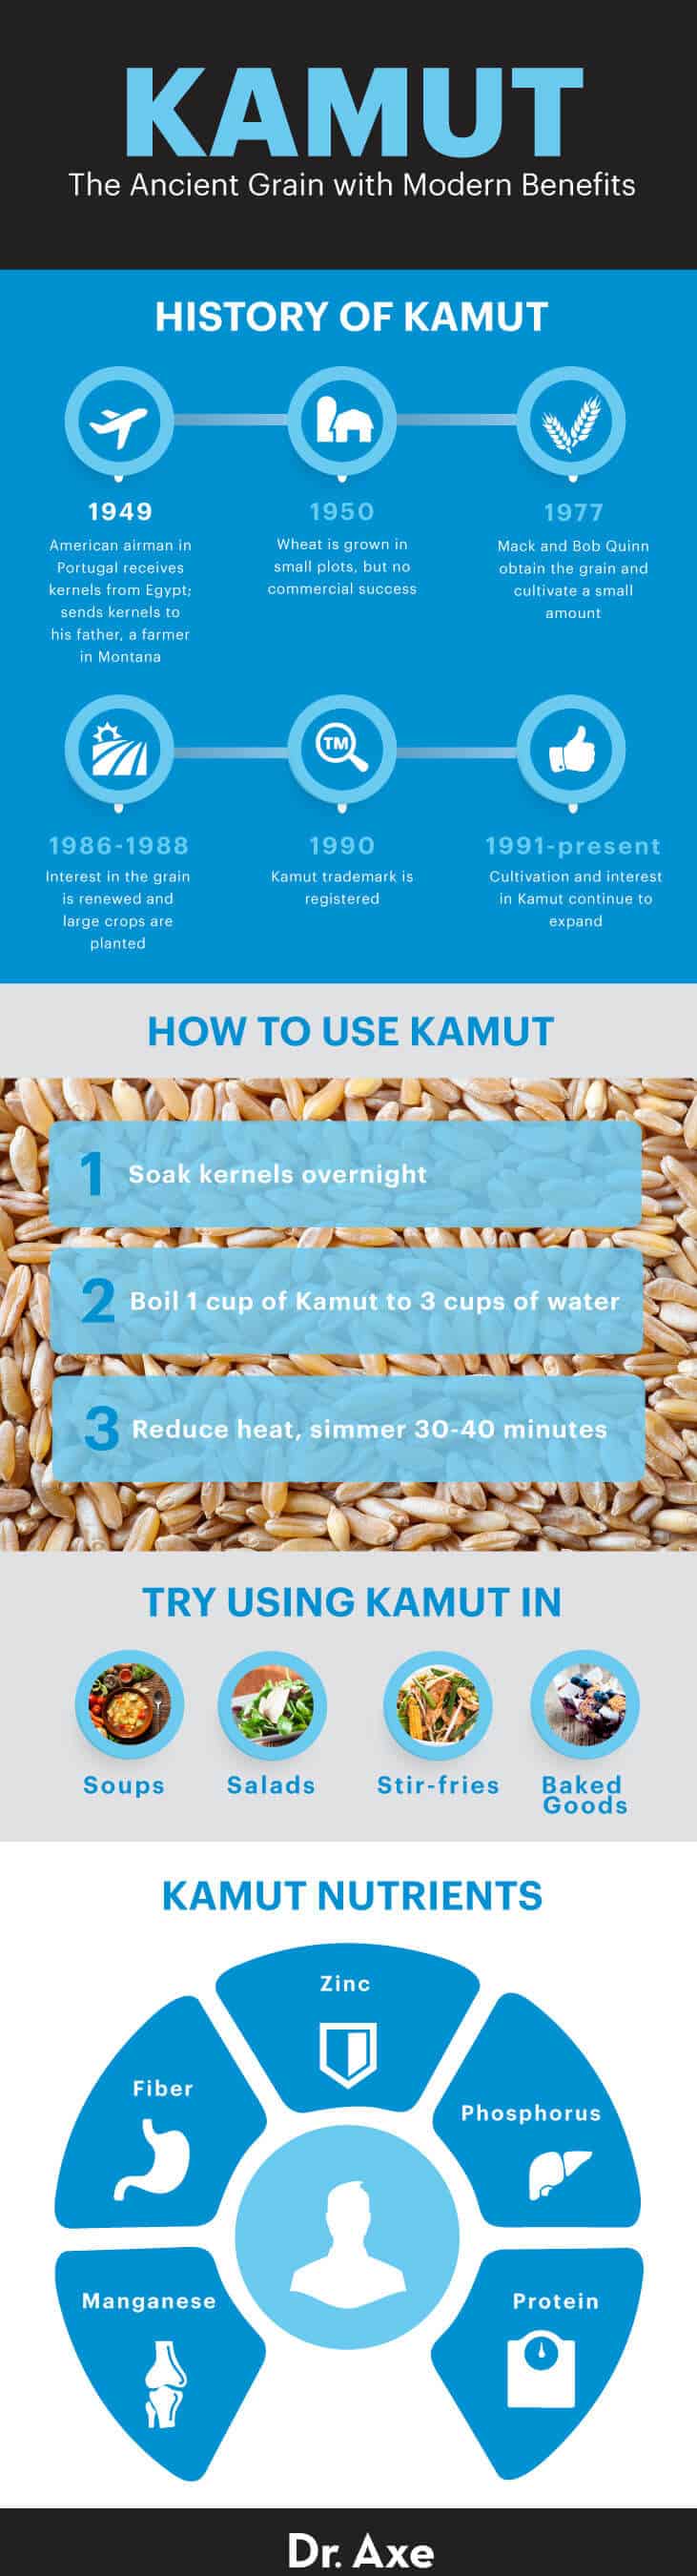 Kamut uses - Dr. Axe